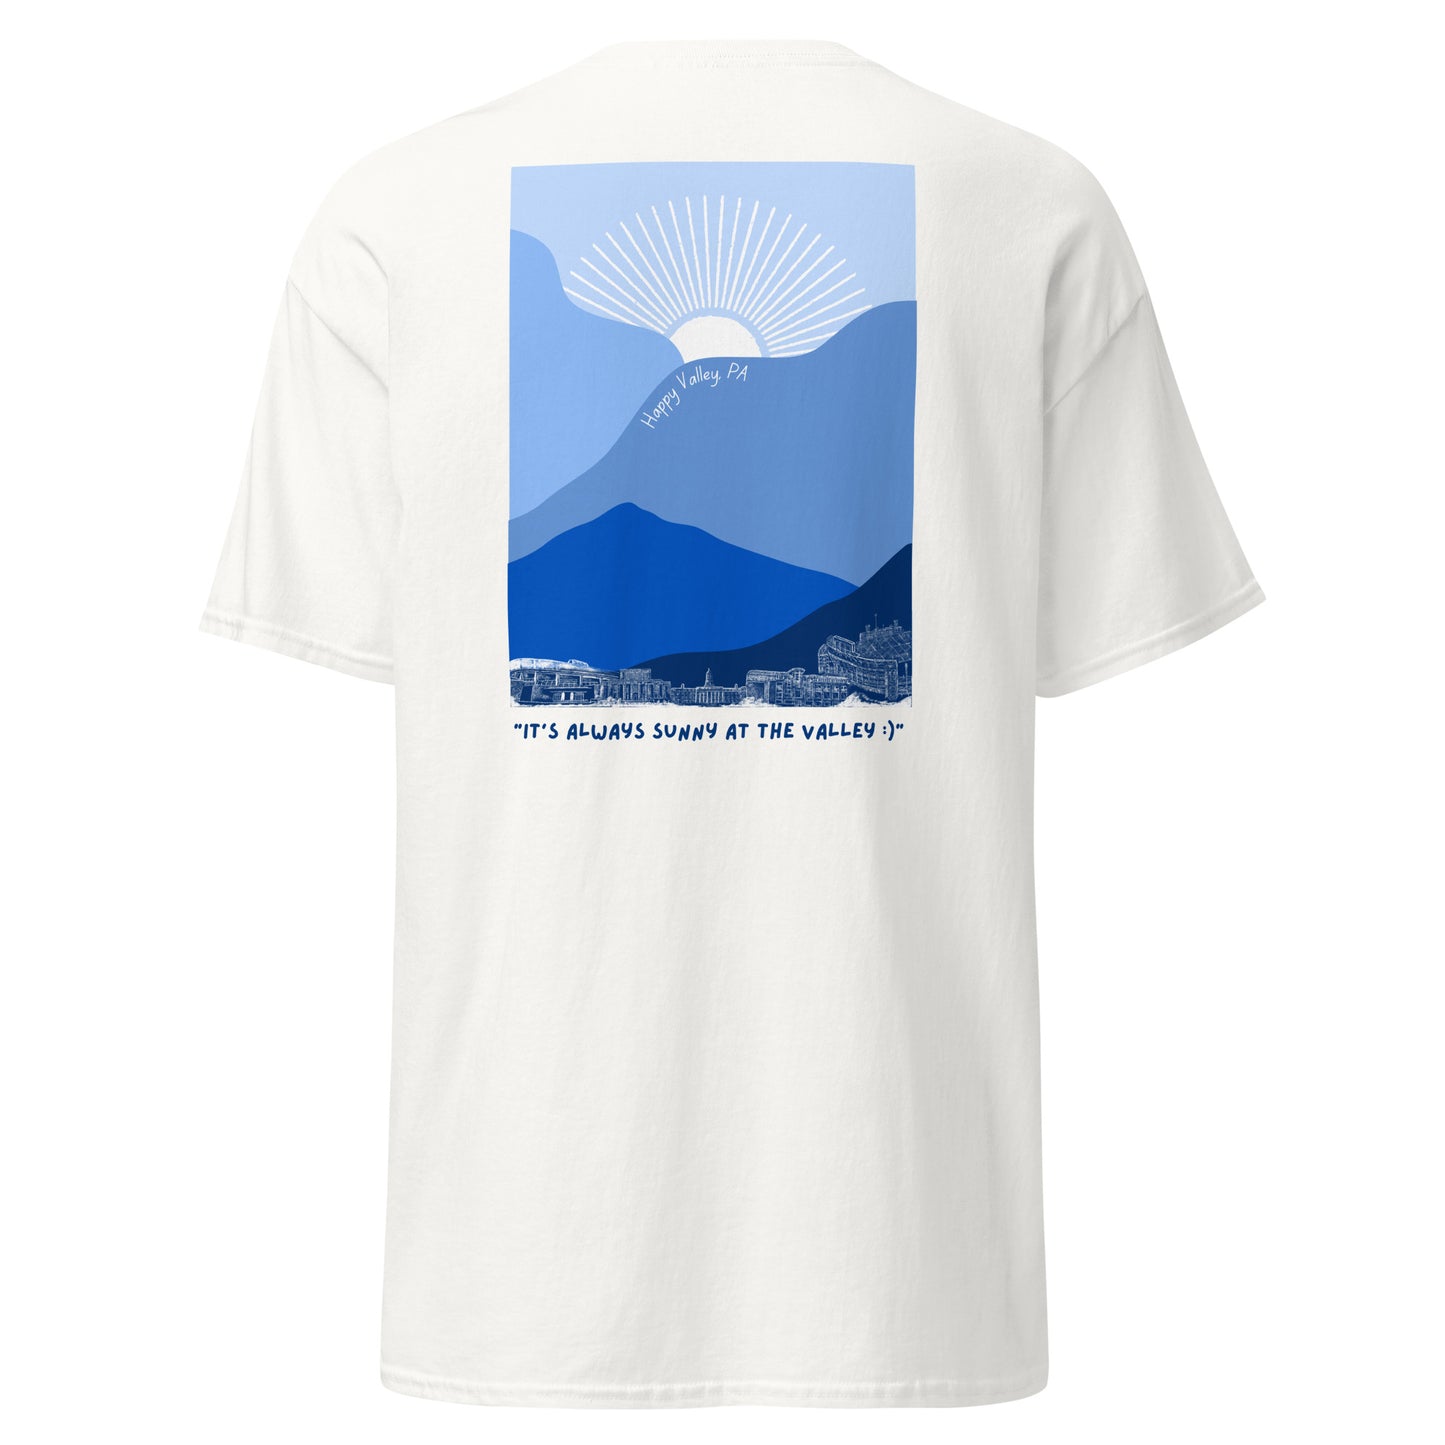 "It's always sunny at the happy valley" Tee LT